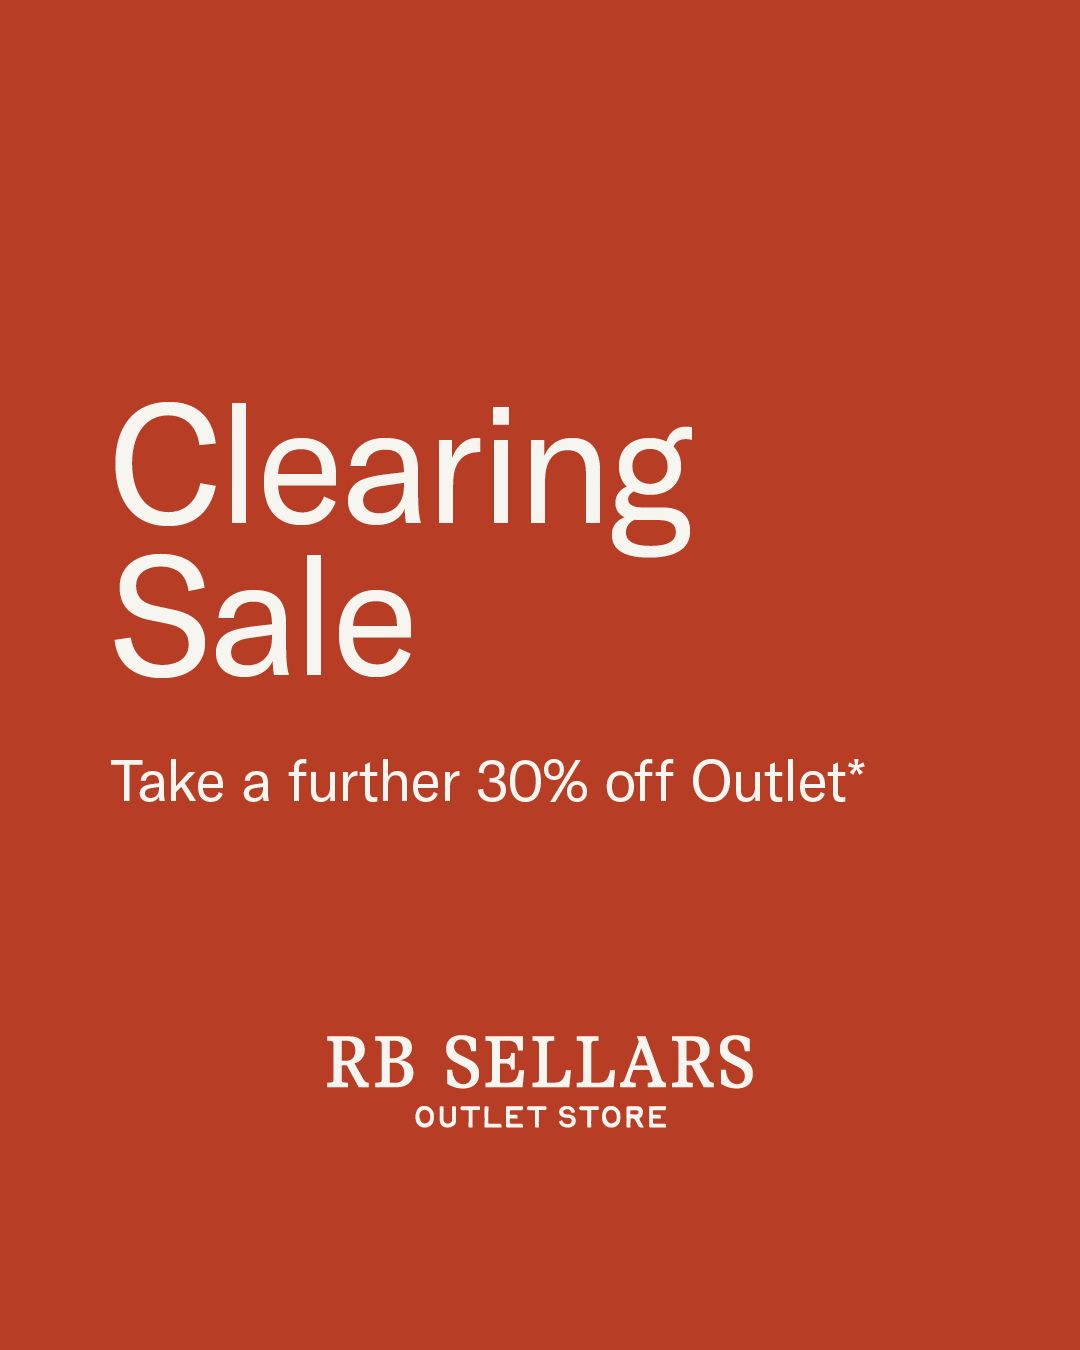 Clearing Sale Now On! 

Take a further 30% off Outlet*

Limited Time Only. 

Shop Clearing Sale via the link in bio. 

#RBSellars